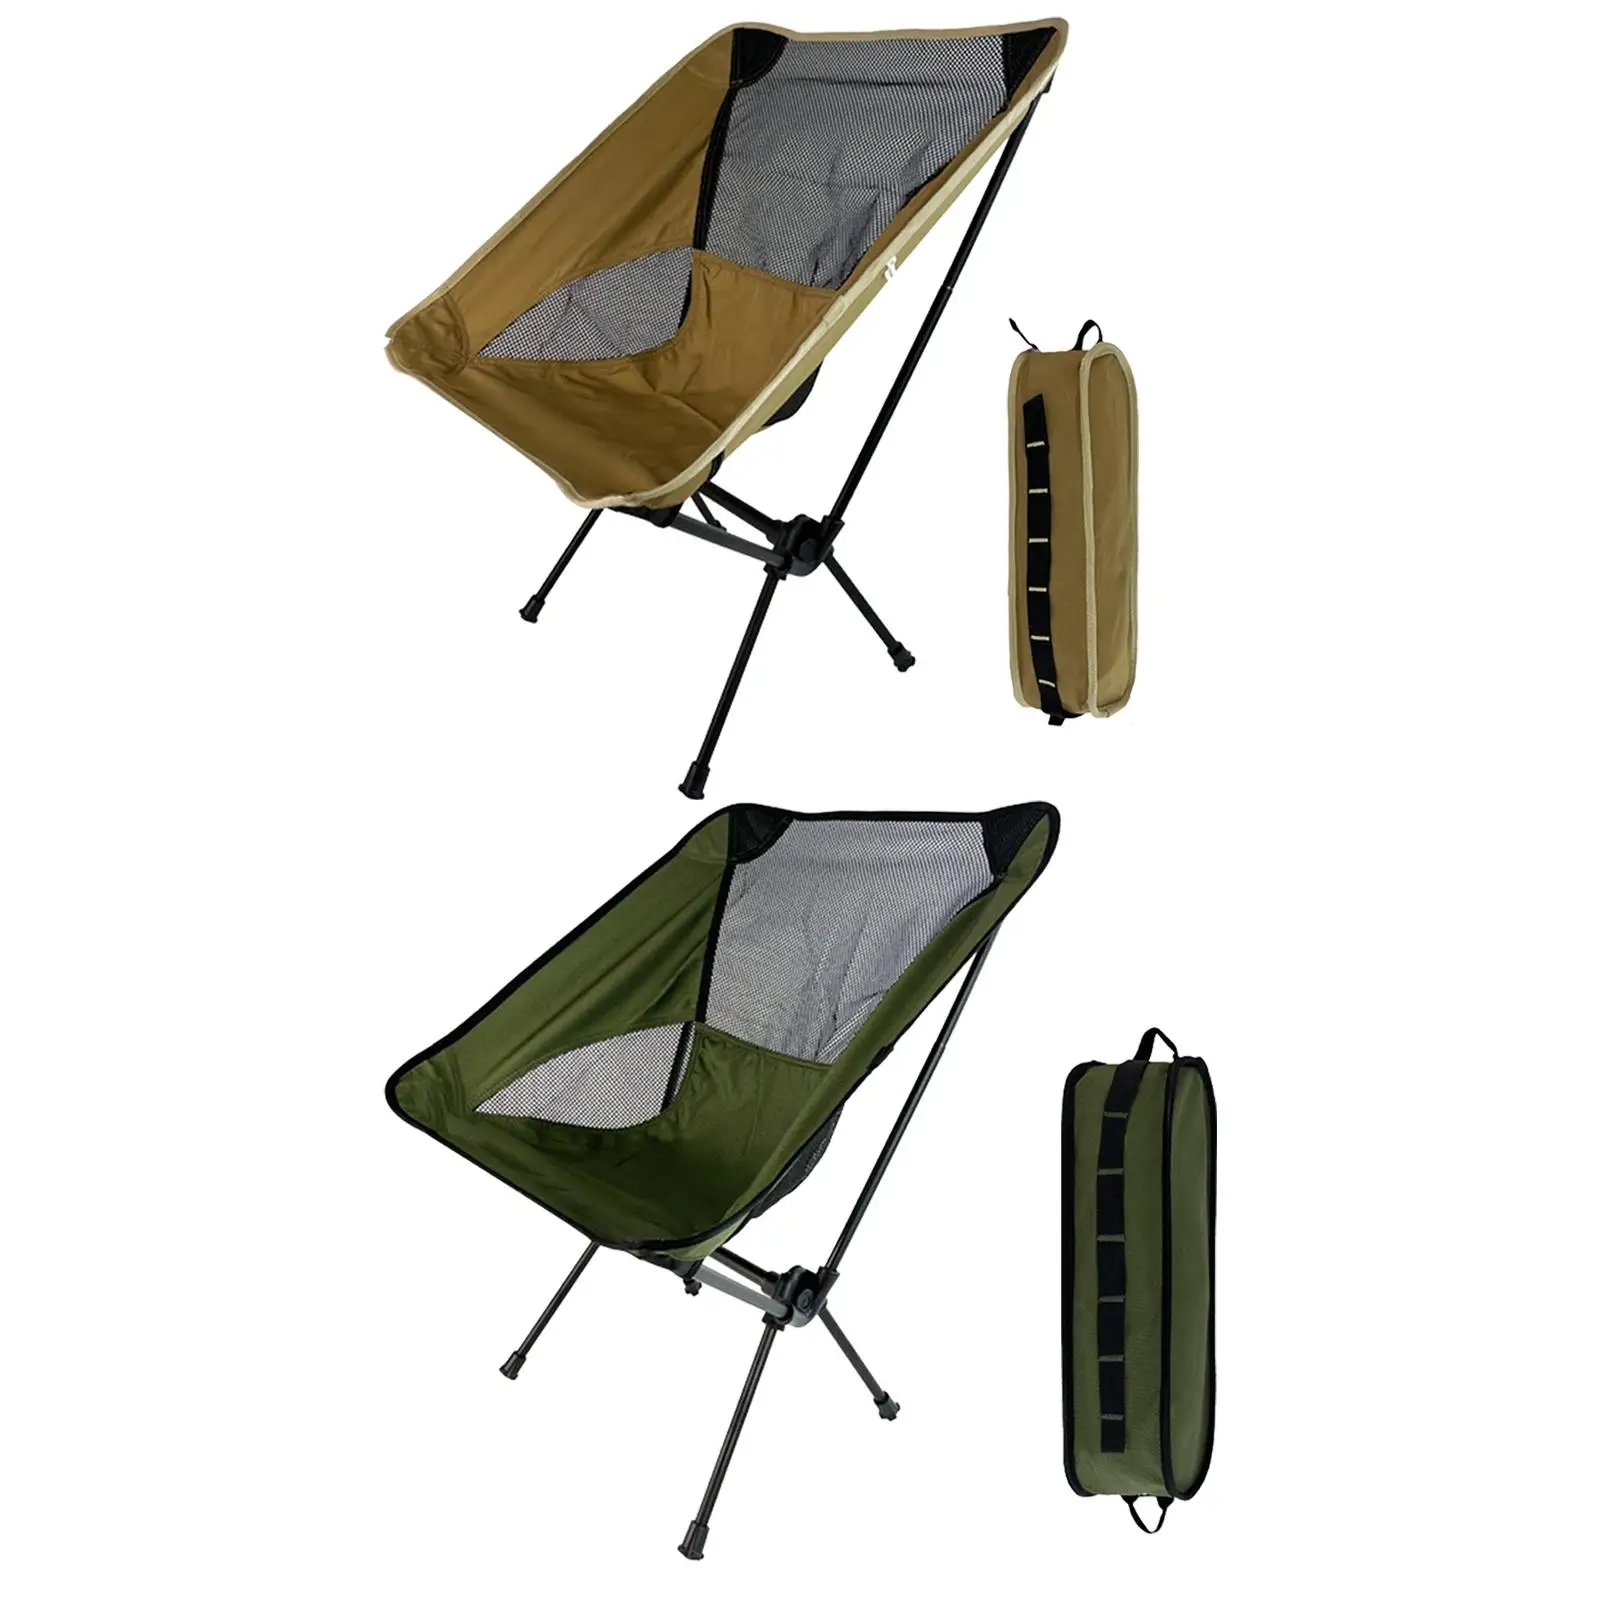 Outdoor Fishing Chair Portable Lightweight Home Garden Seat High Quality Travel Hiking Picnic Beach BBQ Folding Camping Chair